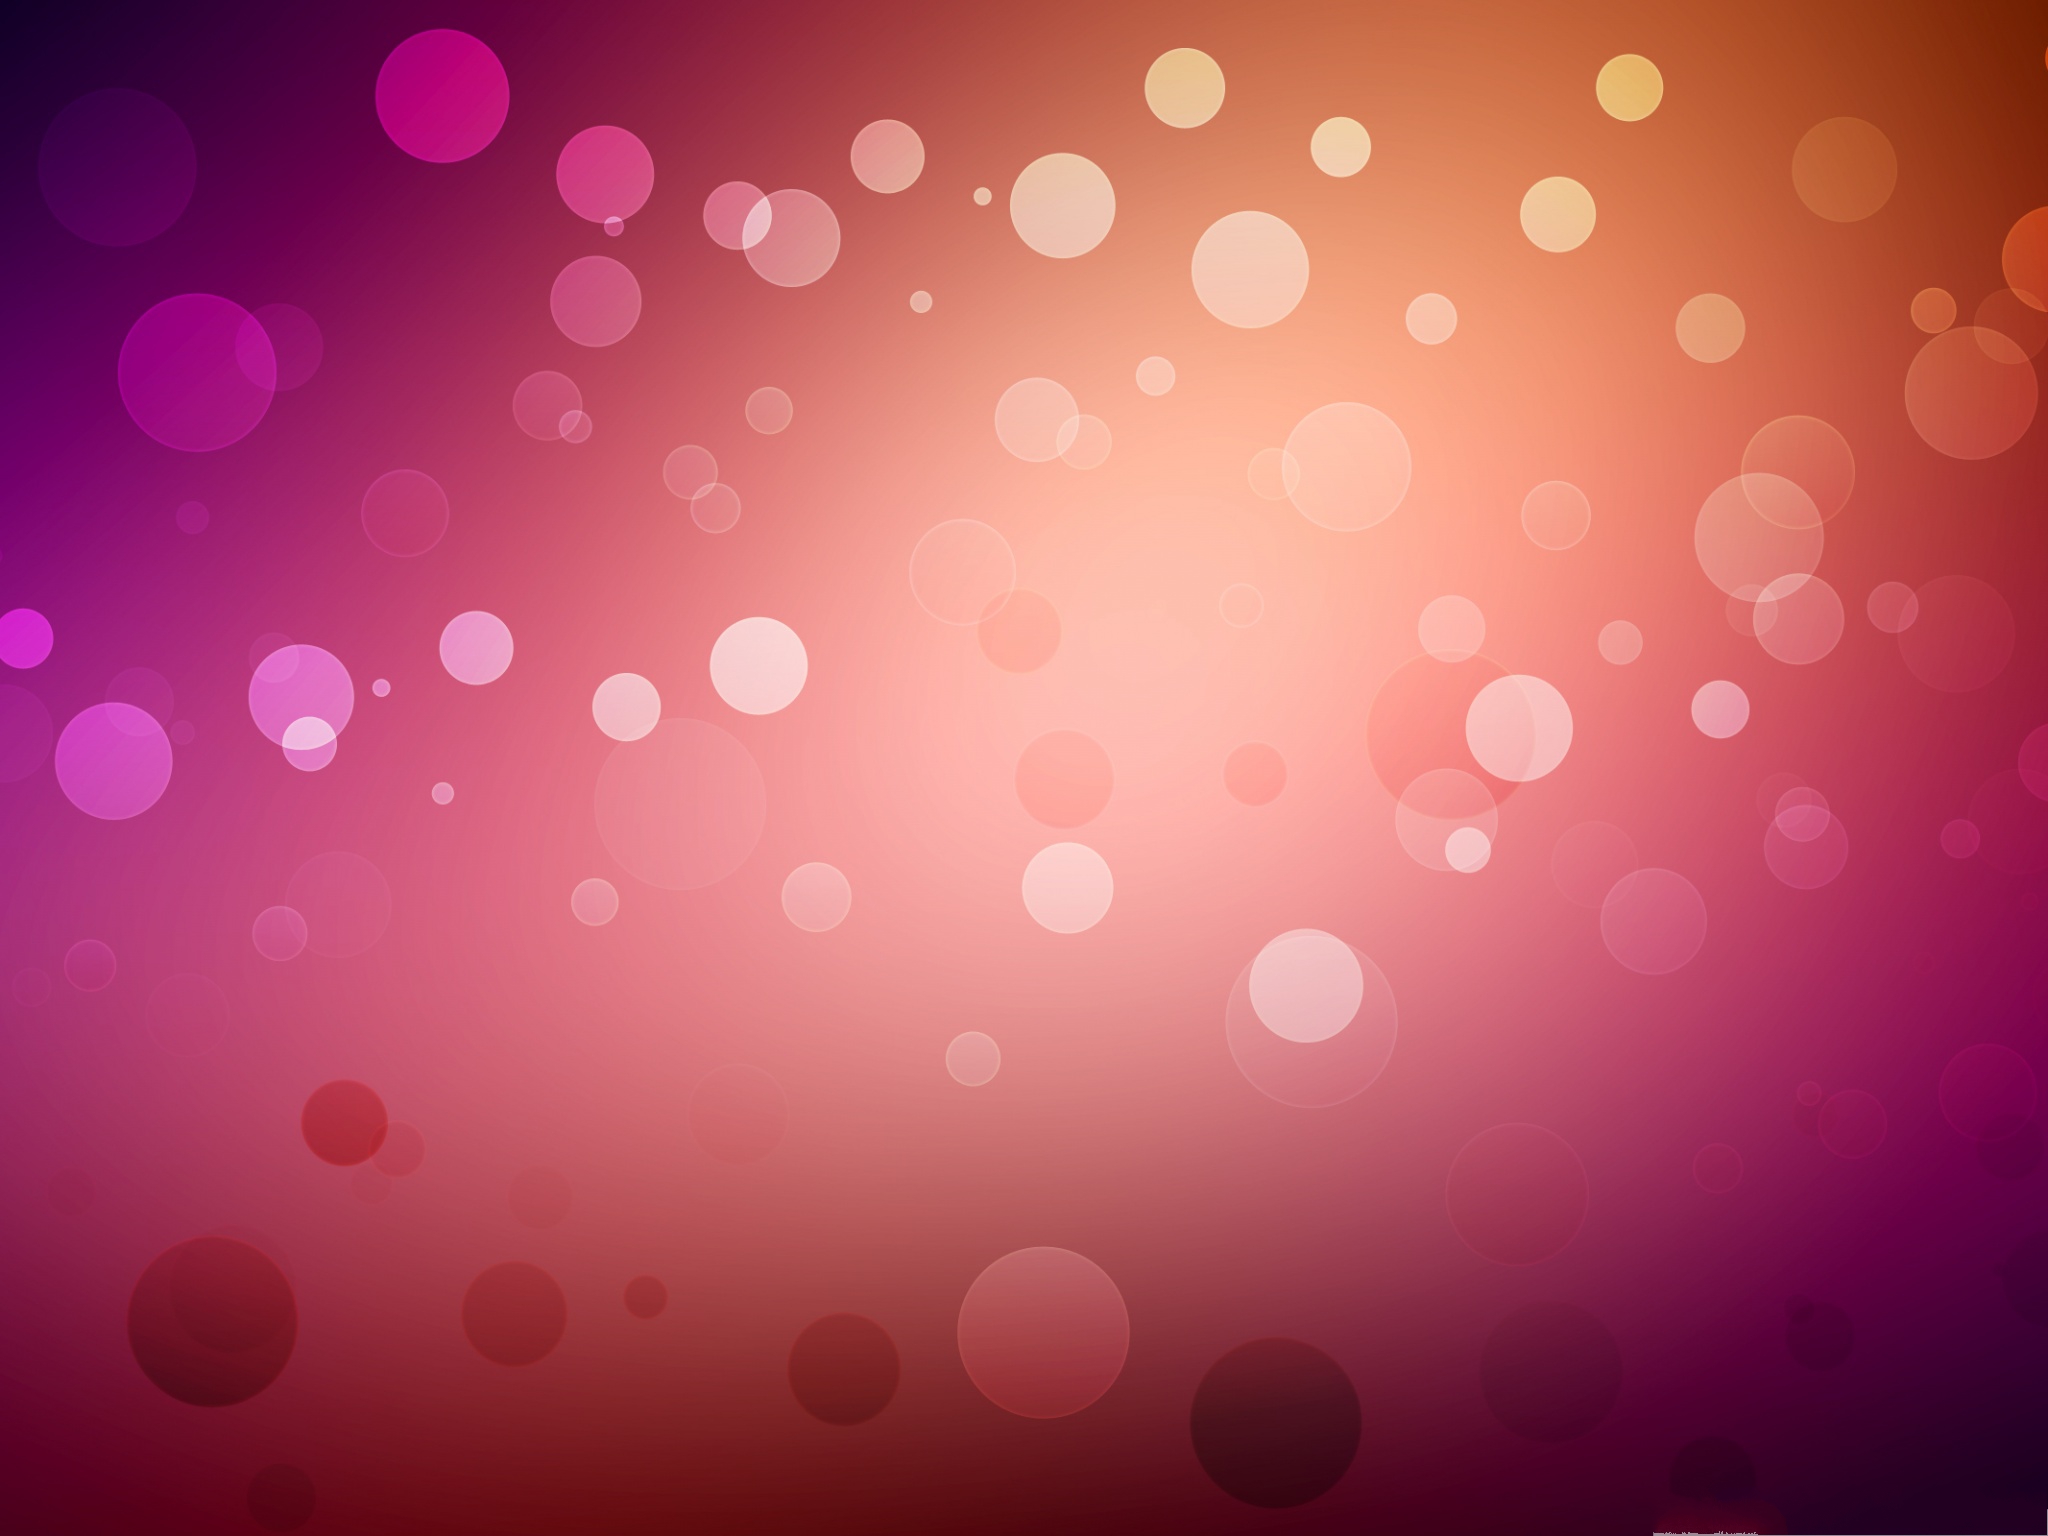 Hd Wallpaper Background Pink Bokeh Effect Add Romantic Color To Your Device 2048x1536 Free Wallpaper Download 2048x1536 Free Wallpaper Download Free Wallpaper World